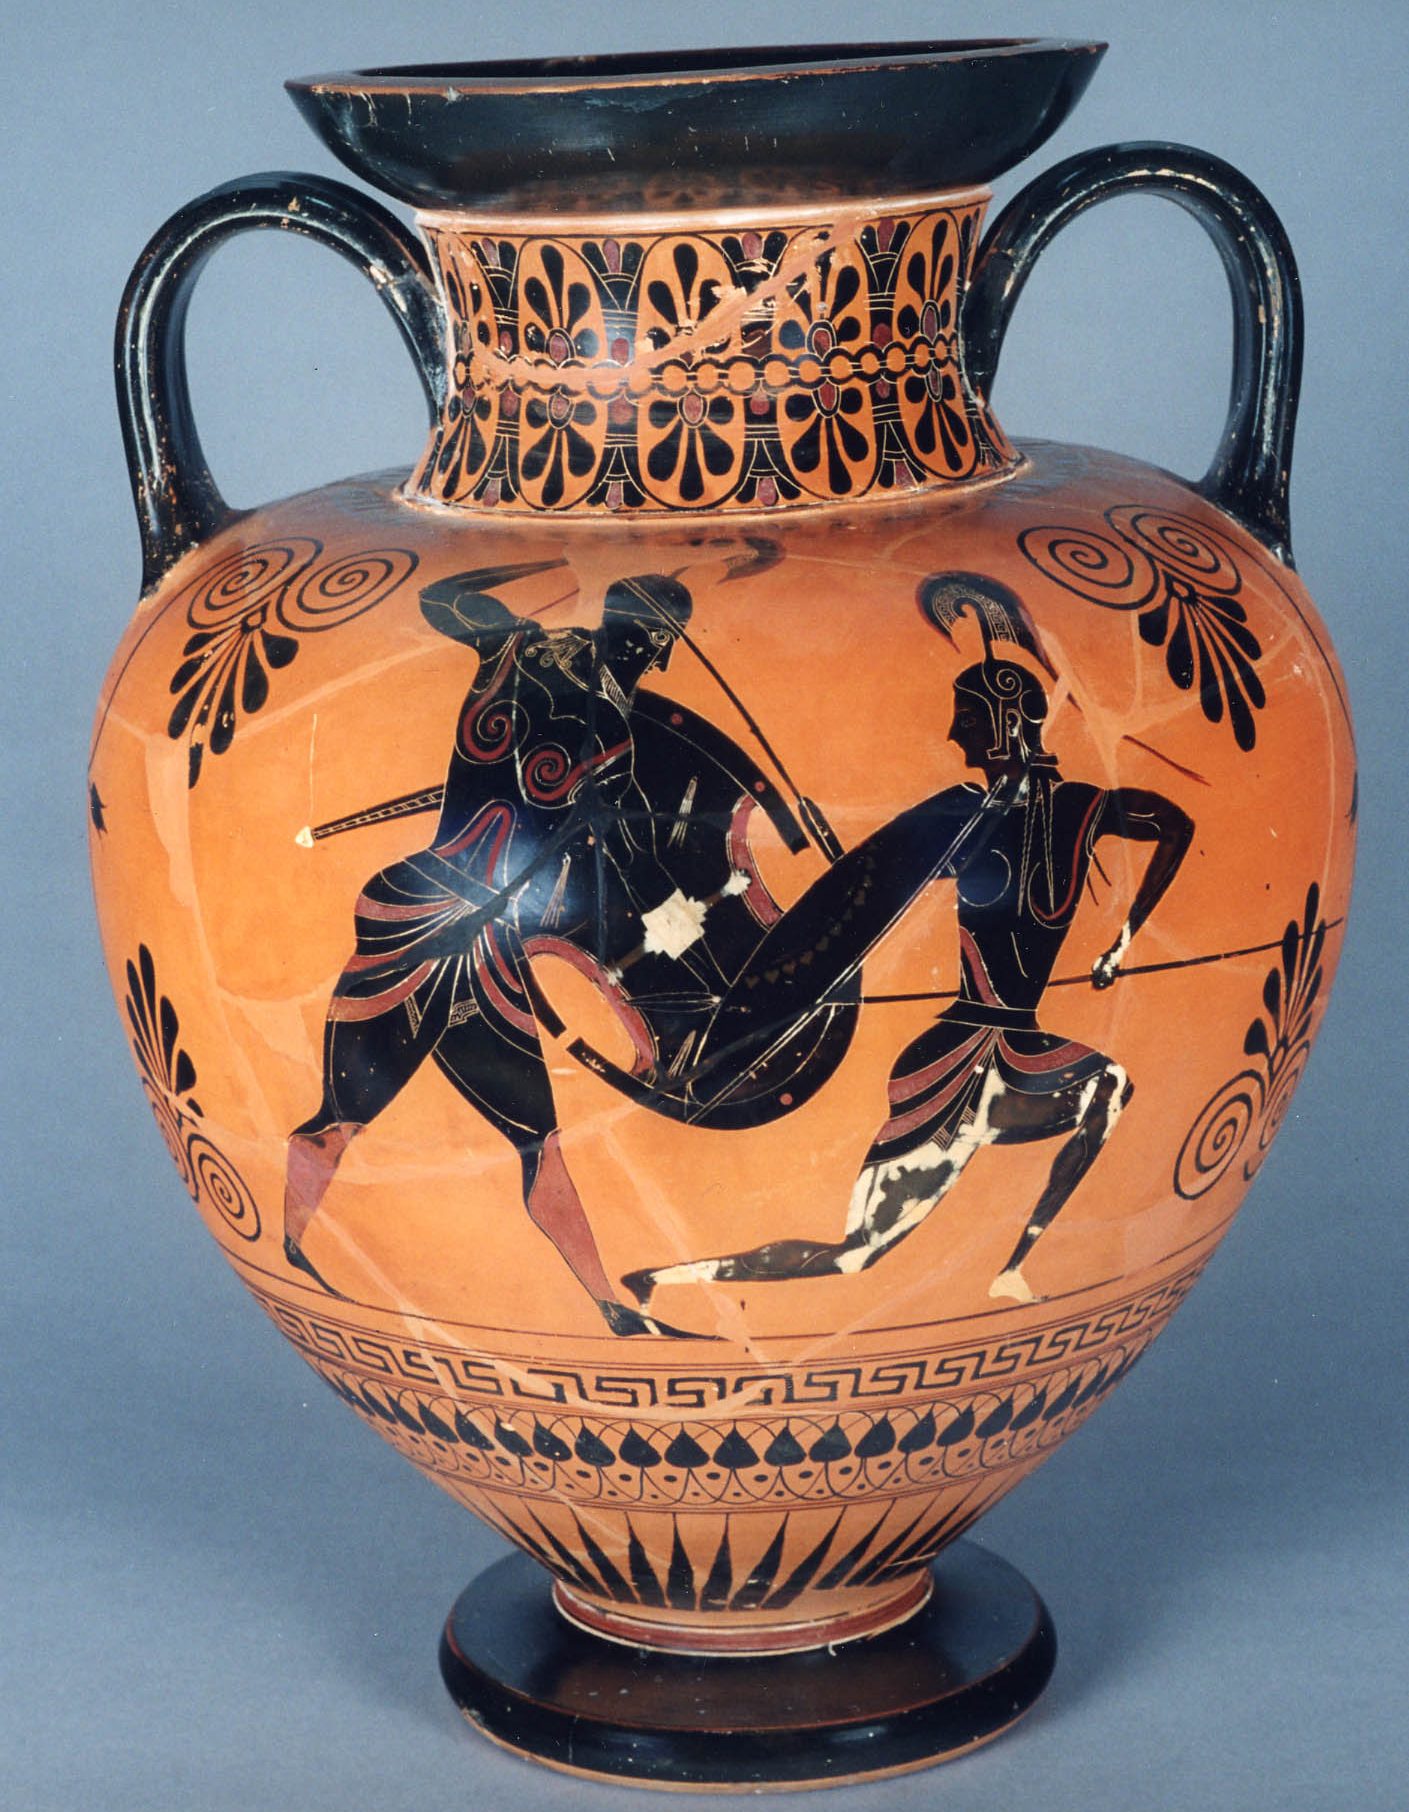 Achilles, with shield and helm, stabs at Penthesilea with a spear. Penthesilea, with spear, helm, and shield, falls away from Achilles but has her head turned back to look at him.